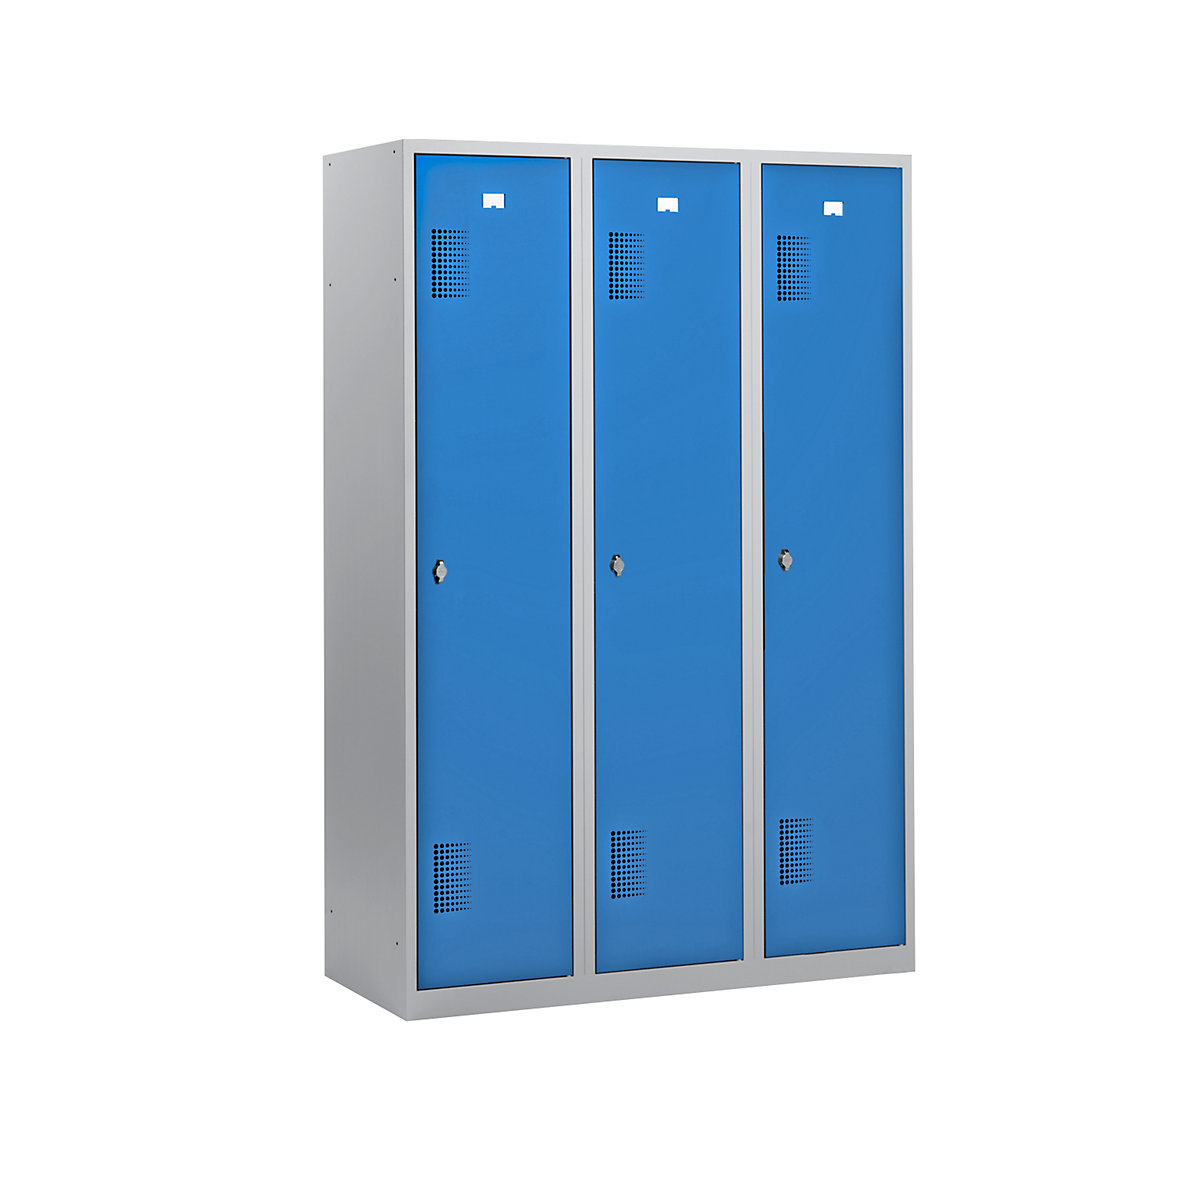 AMSTERDAM cloakroom locker – eurokraft basic, height 1800 mm, width 1200 mm, 3 x 398 mm wide compartments, with fittings for padlock, light grey body / light blue doors-19